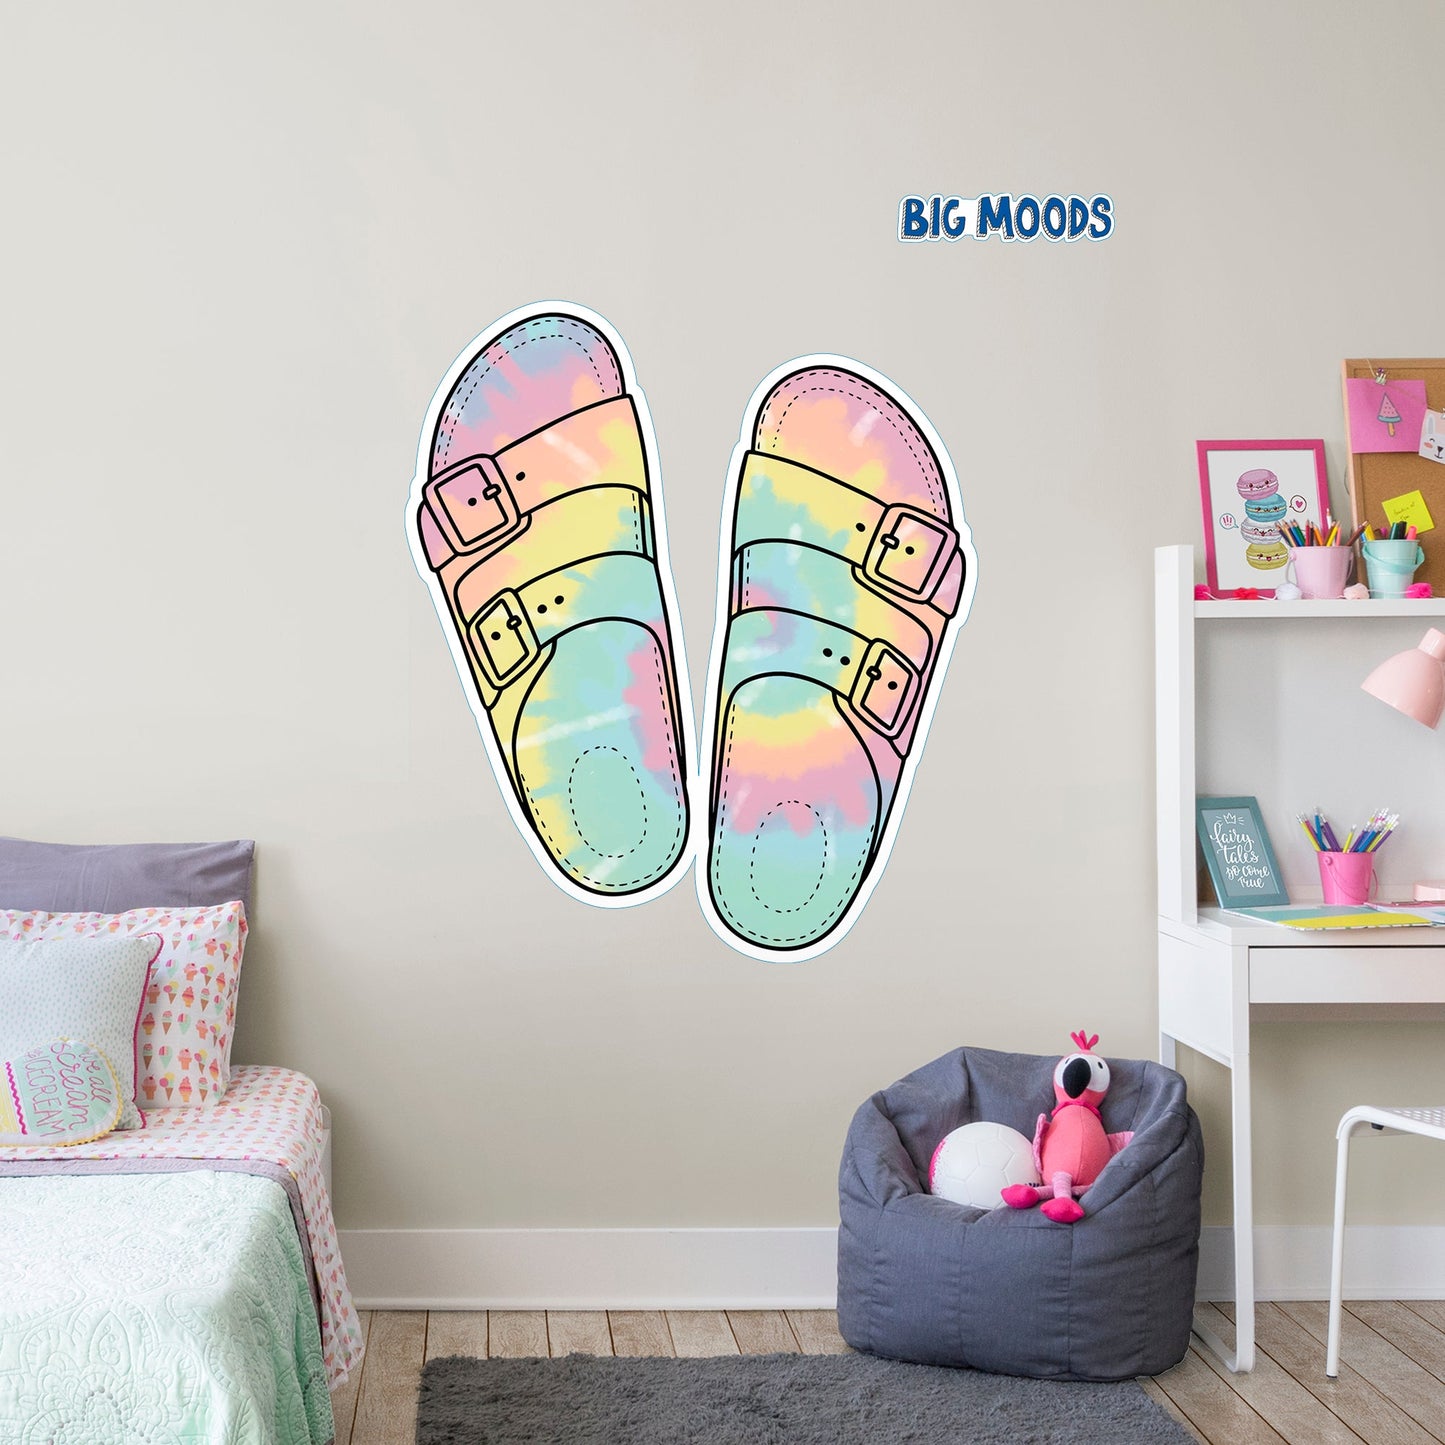 Sandals (Tie-Dye)        - Officially Licensed Big Moods Removable     Adhesive Decal